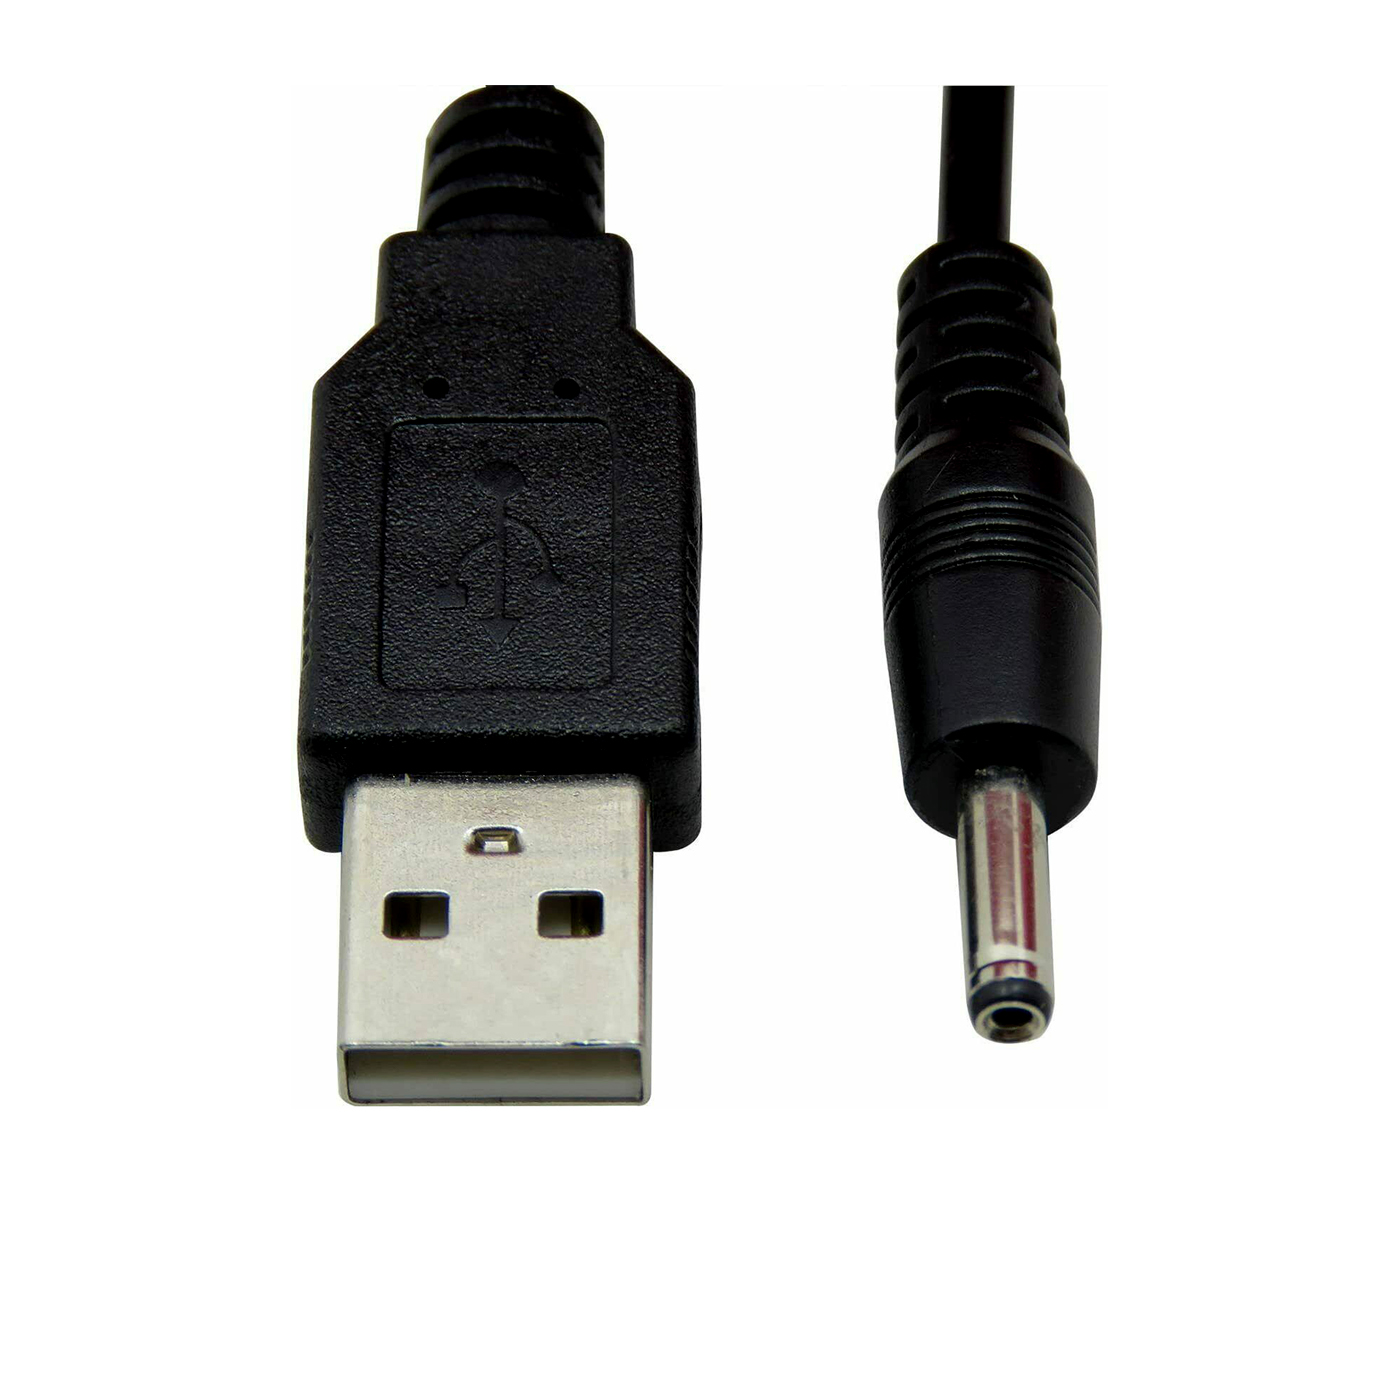 PwrON USB to 3.0mm 1mm Barrel Plug Tip Notebook PC DC Power Supply Cord Cable 3mm 